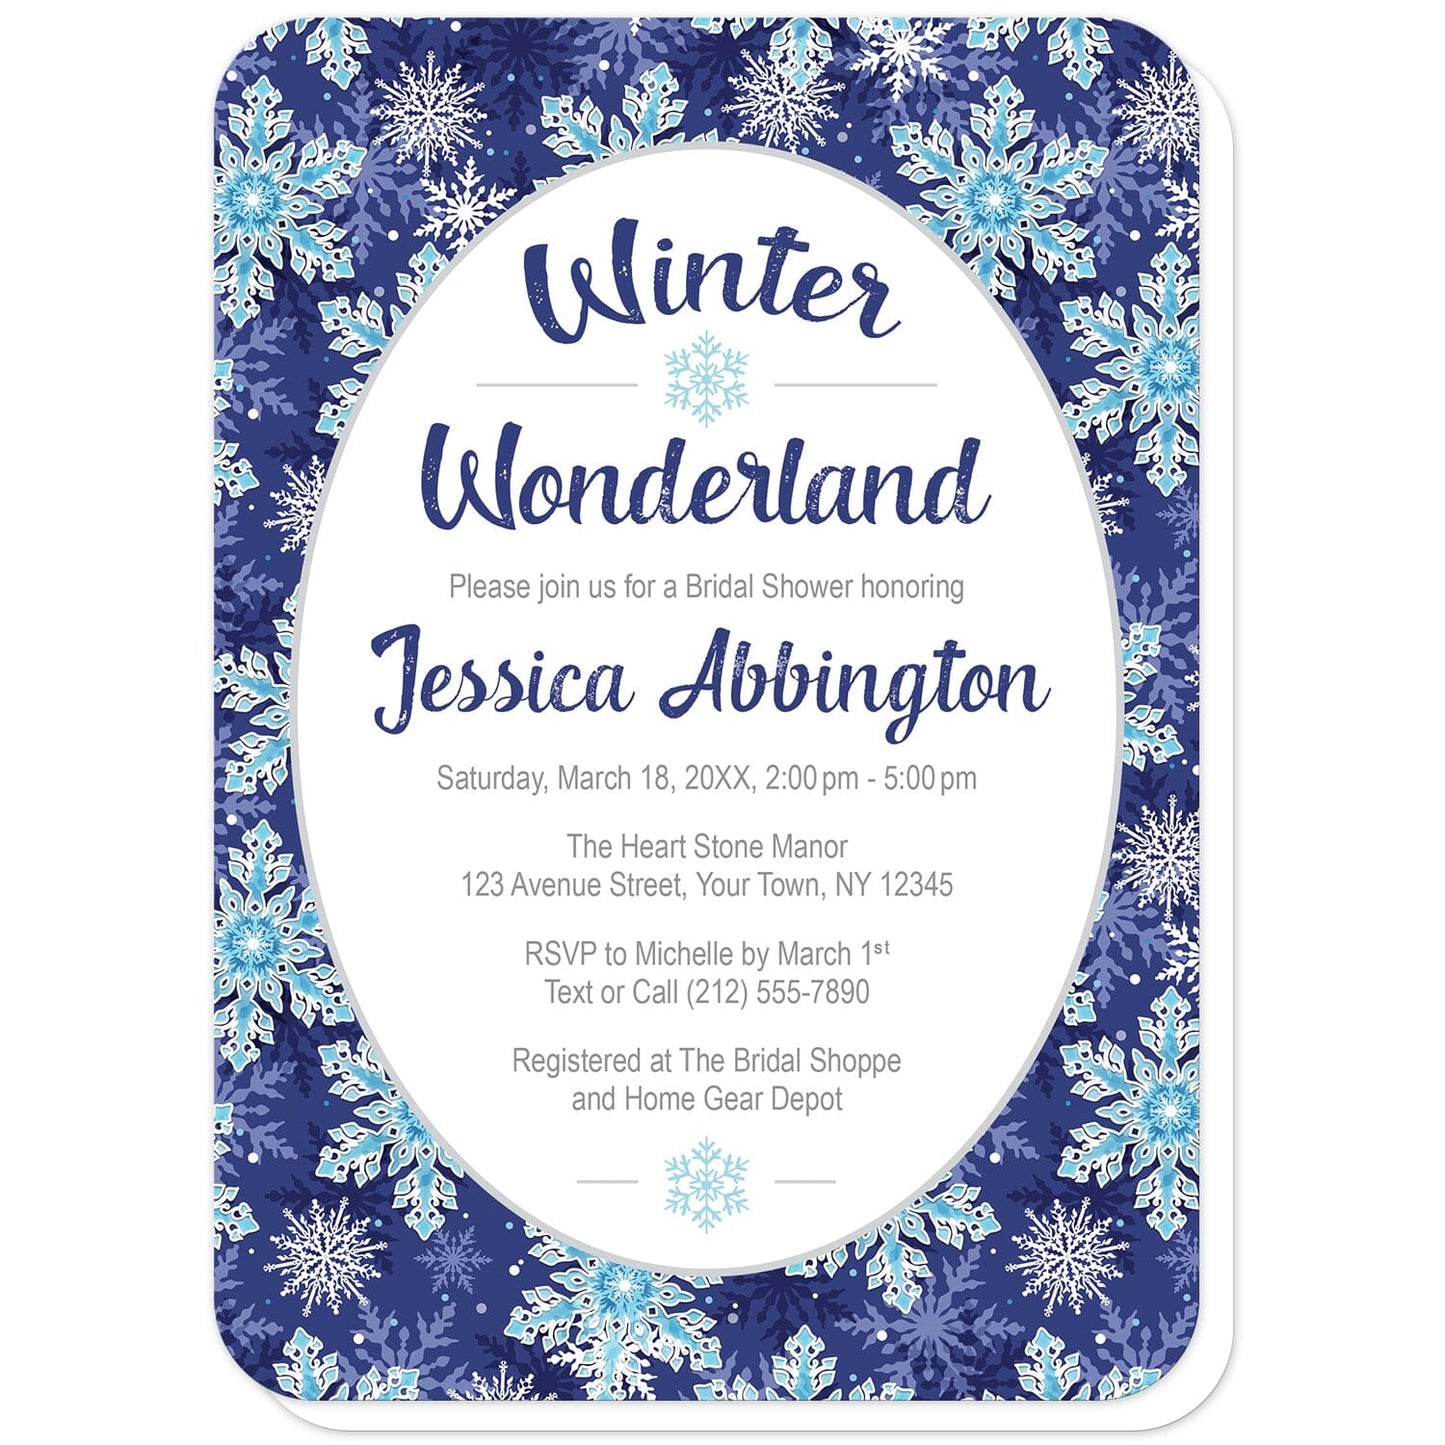 Navy Blue Snowflake Winter Wonderland Bridal Shower Invitations (with rounded corners) at Artistically Invited. Beautifully ornate navy blue snowflake Winter Wonderland bridal shower invitations with your personalized bridal shower celebration details custom printed in navy blue and gray in a white oval frame design over a navy blue, aqua, and white snowflake pattern background.